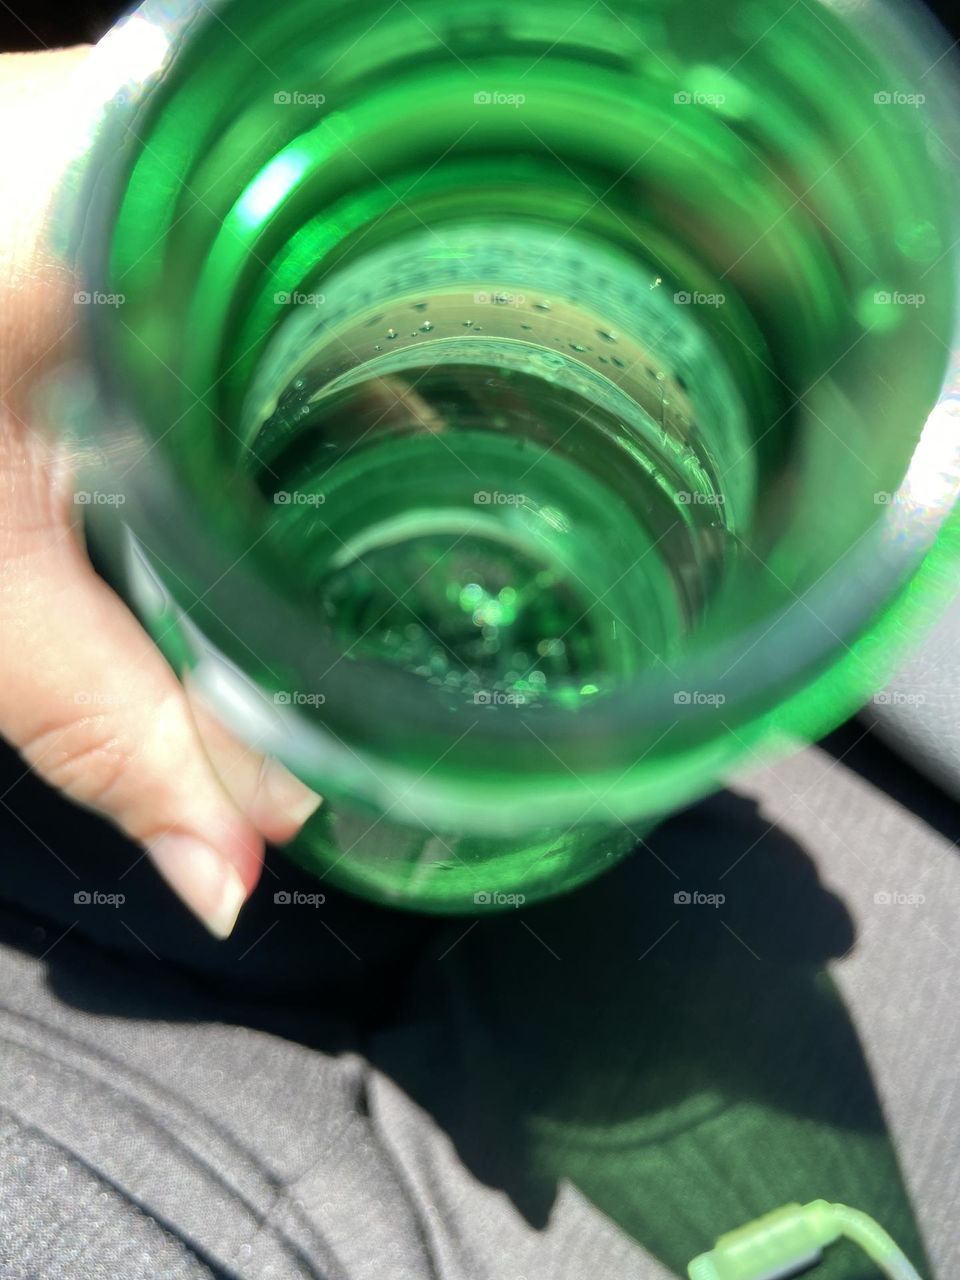 Holding a bottle of San Pellegrino sparkling water on a hot summer day. Bubbles can be seen in the water at the bottom and around the edges of the bright green bottle.  